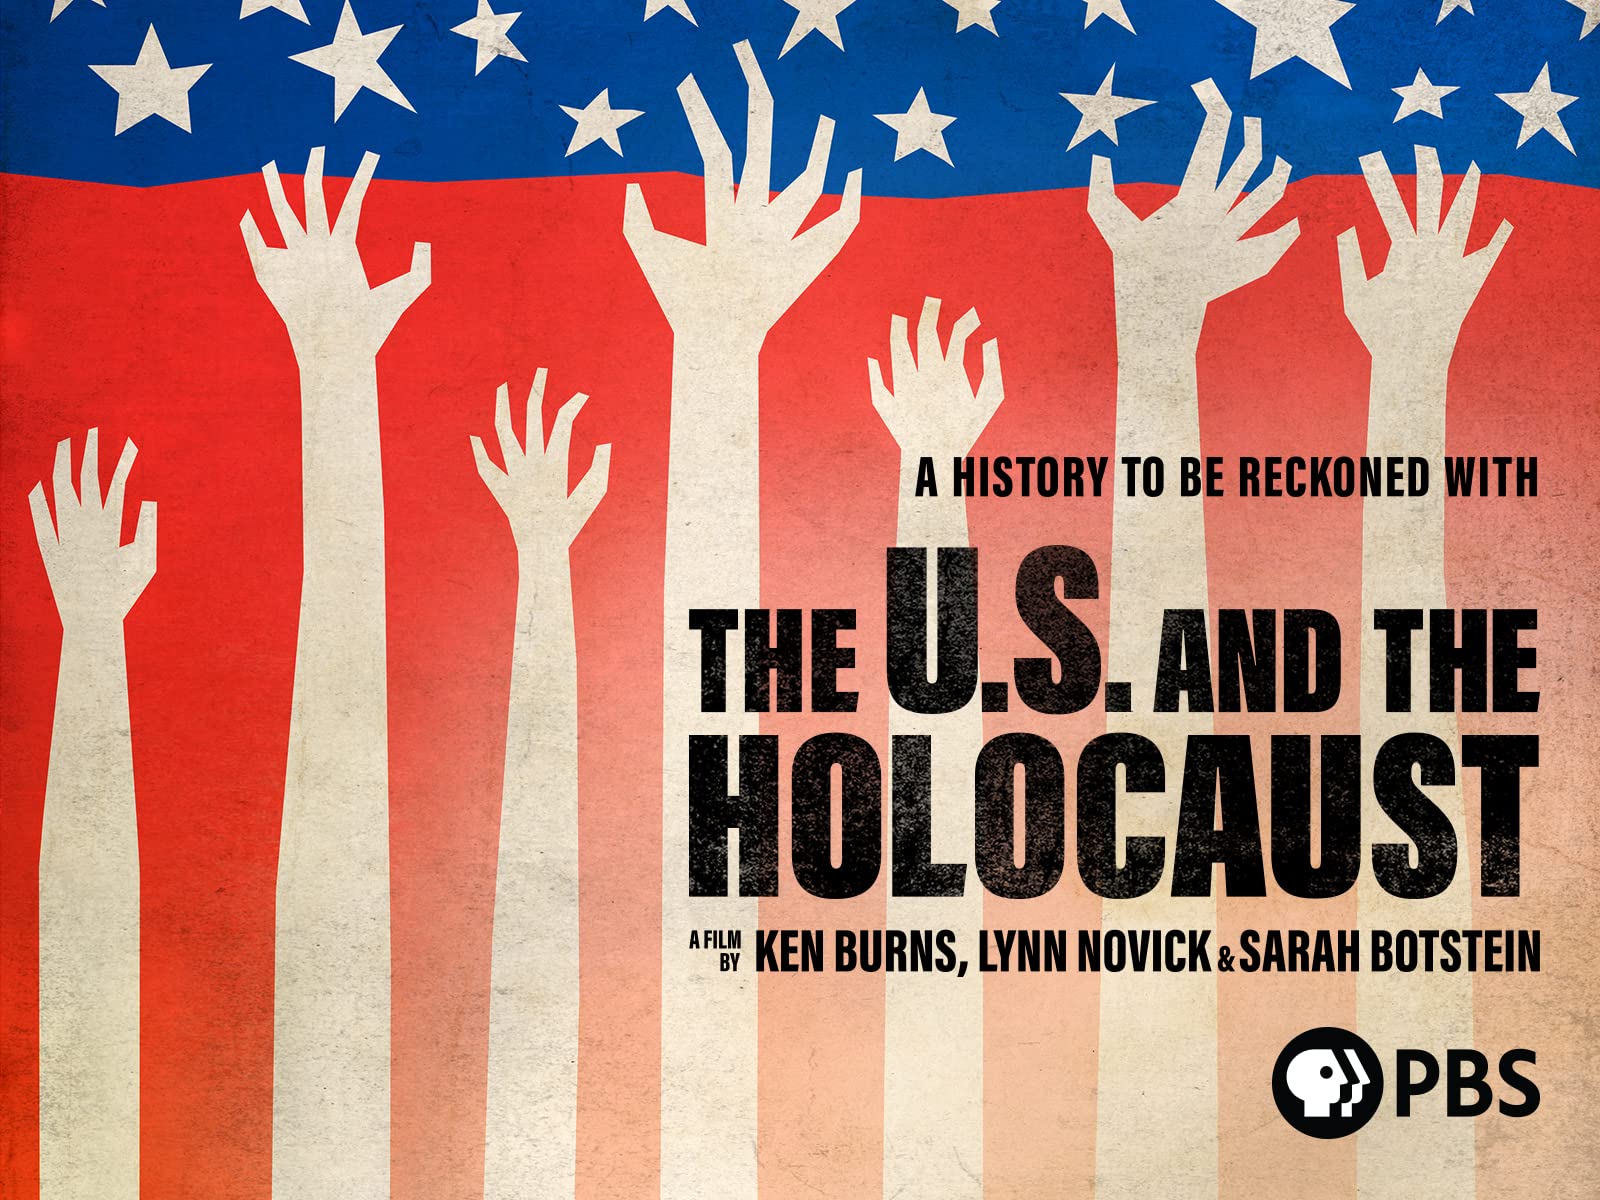 Television Academy Honors awarded to “The U.S. and the Holocaust”